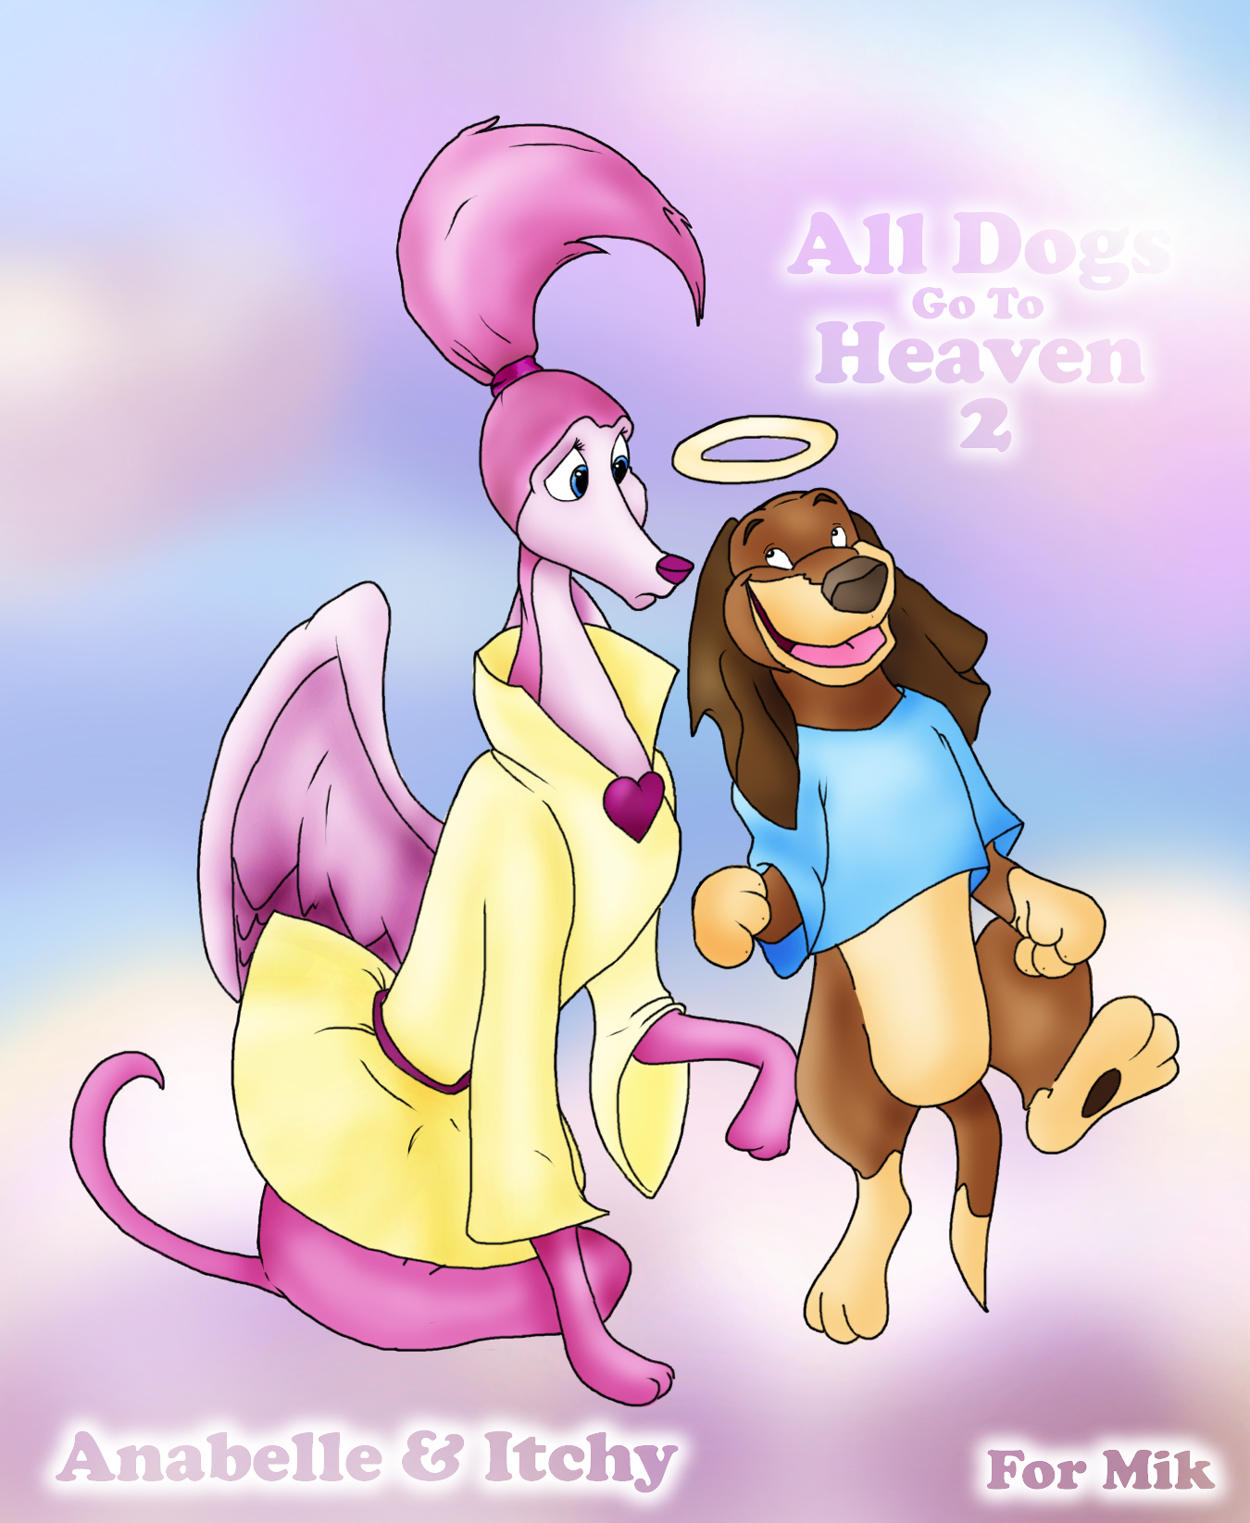 All Dogs Go To Heaven [Pamps]